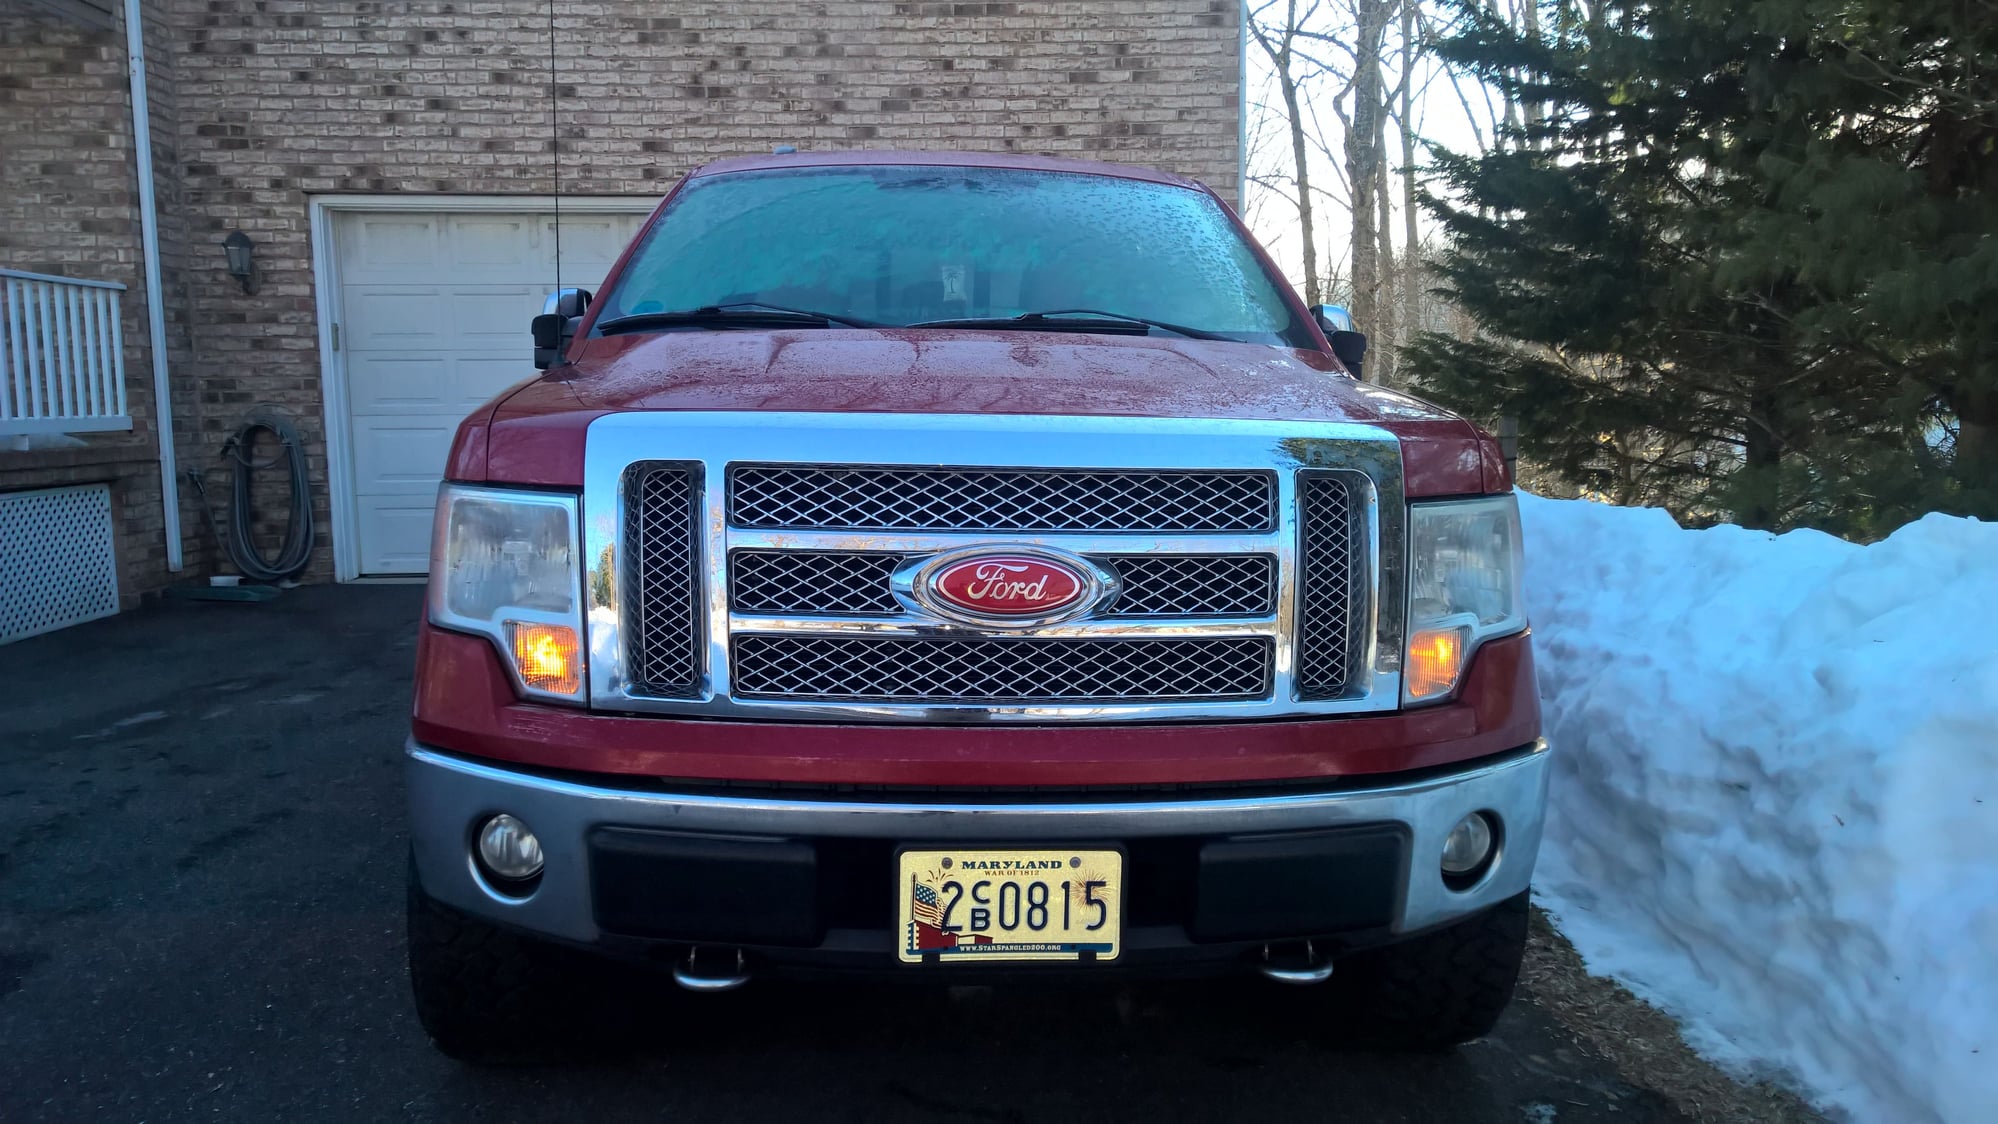 Changing Color of Ford Badge - Page 5 - Ford F150 Forum - Community of